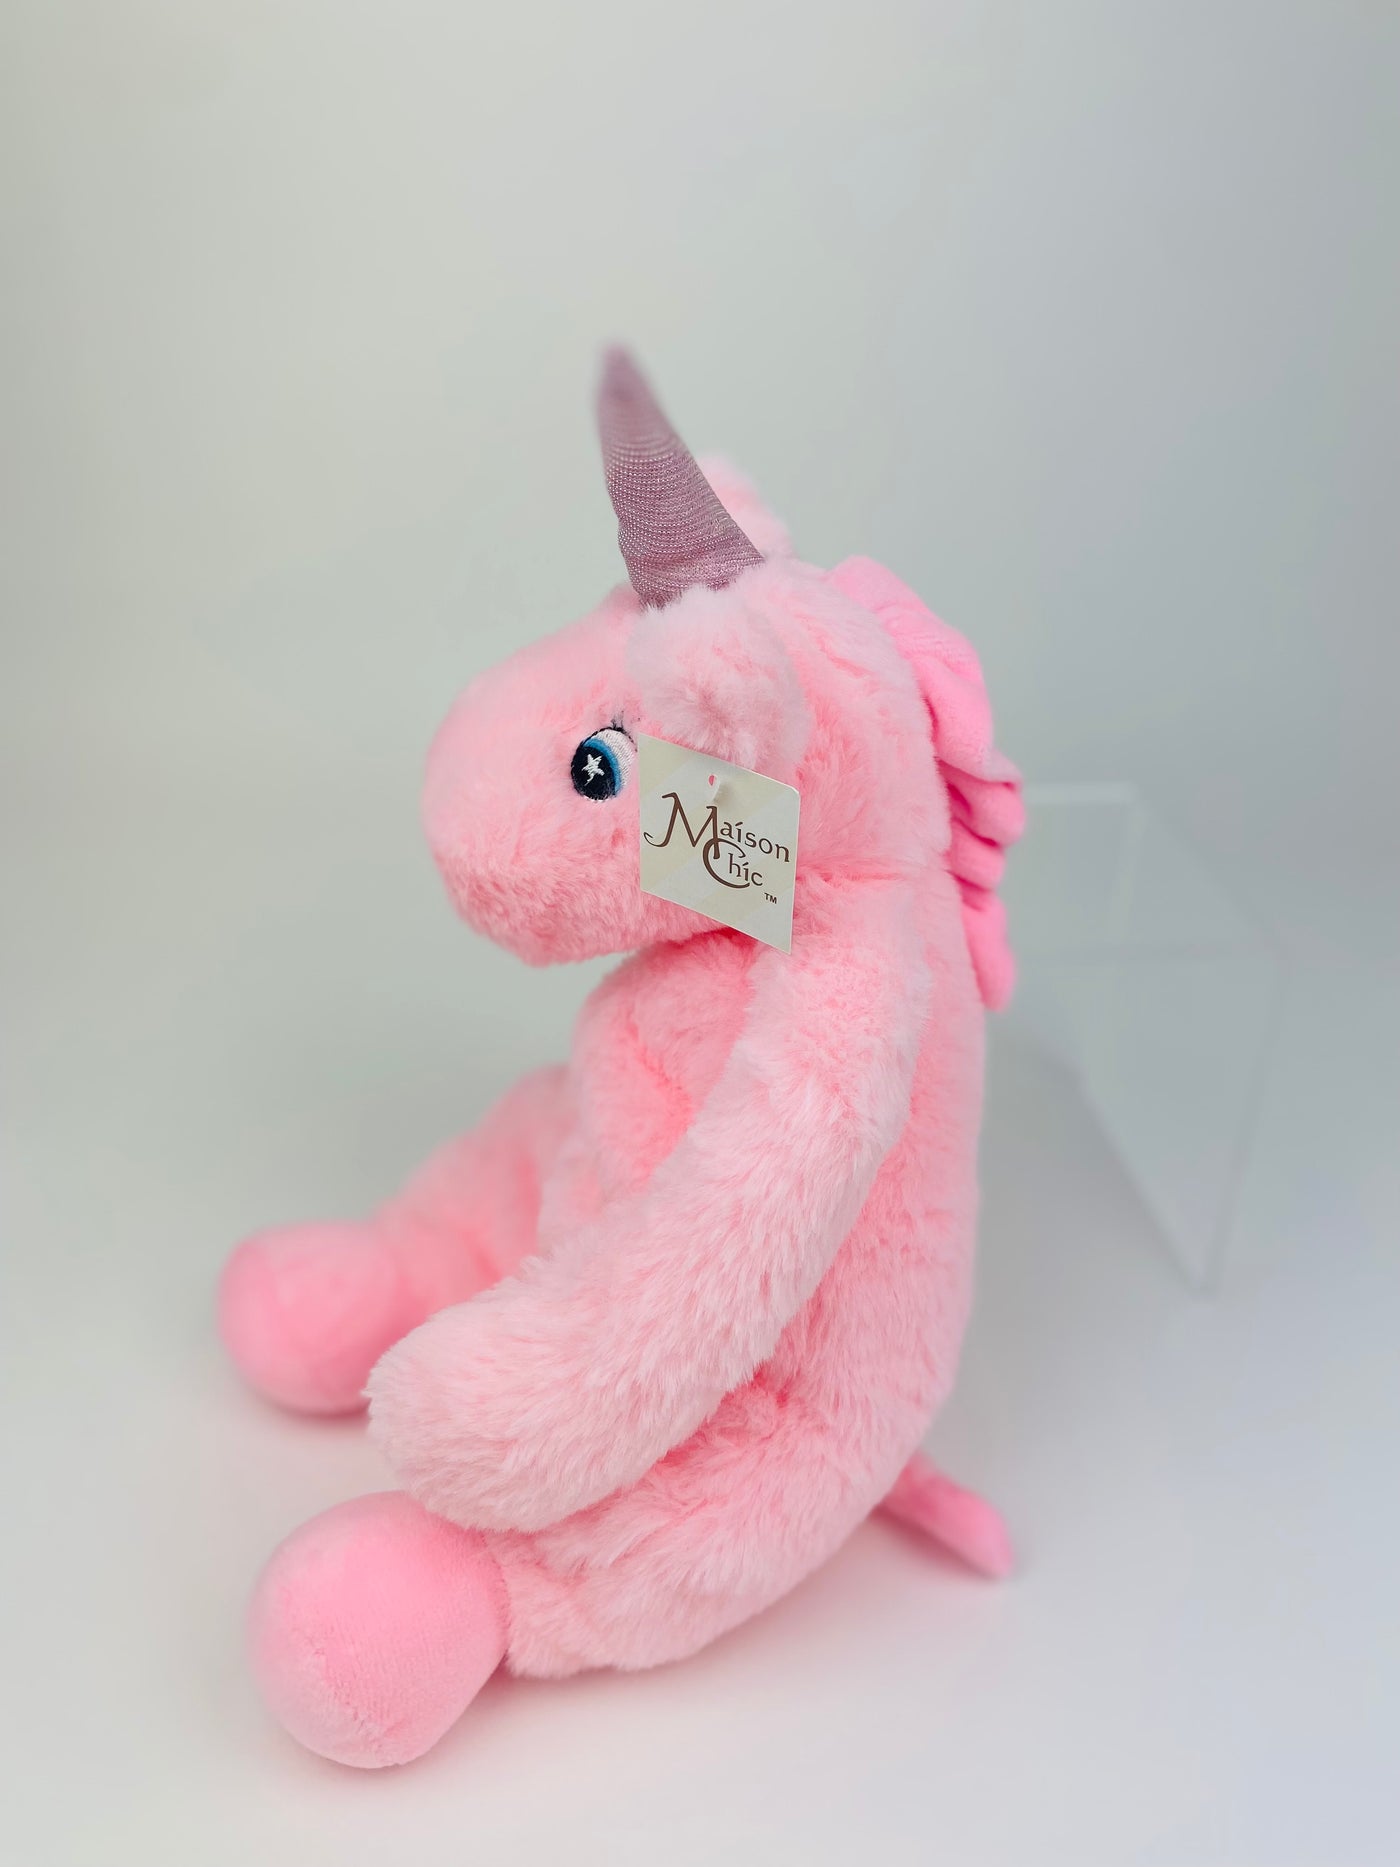 Sparkle the Unicorn Stuffed Animal - SOLD OUT!